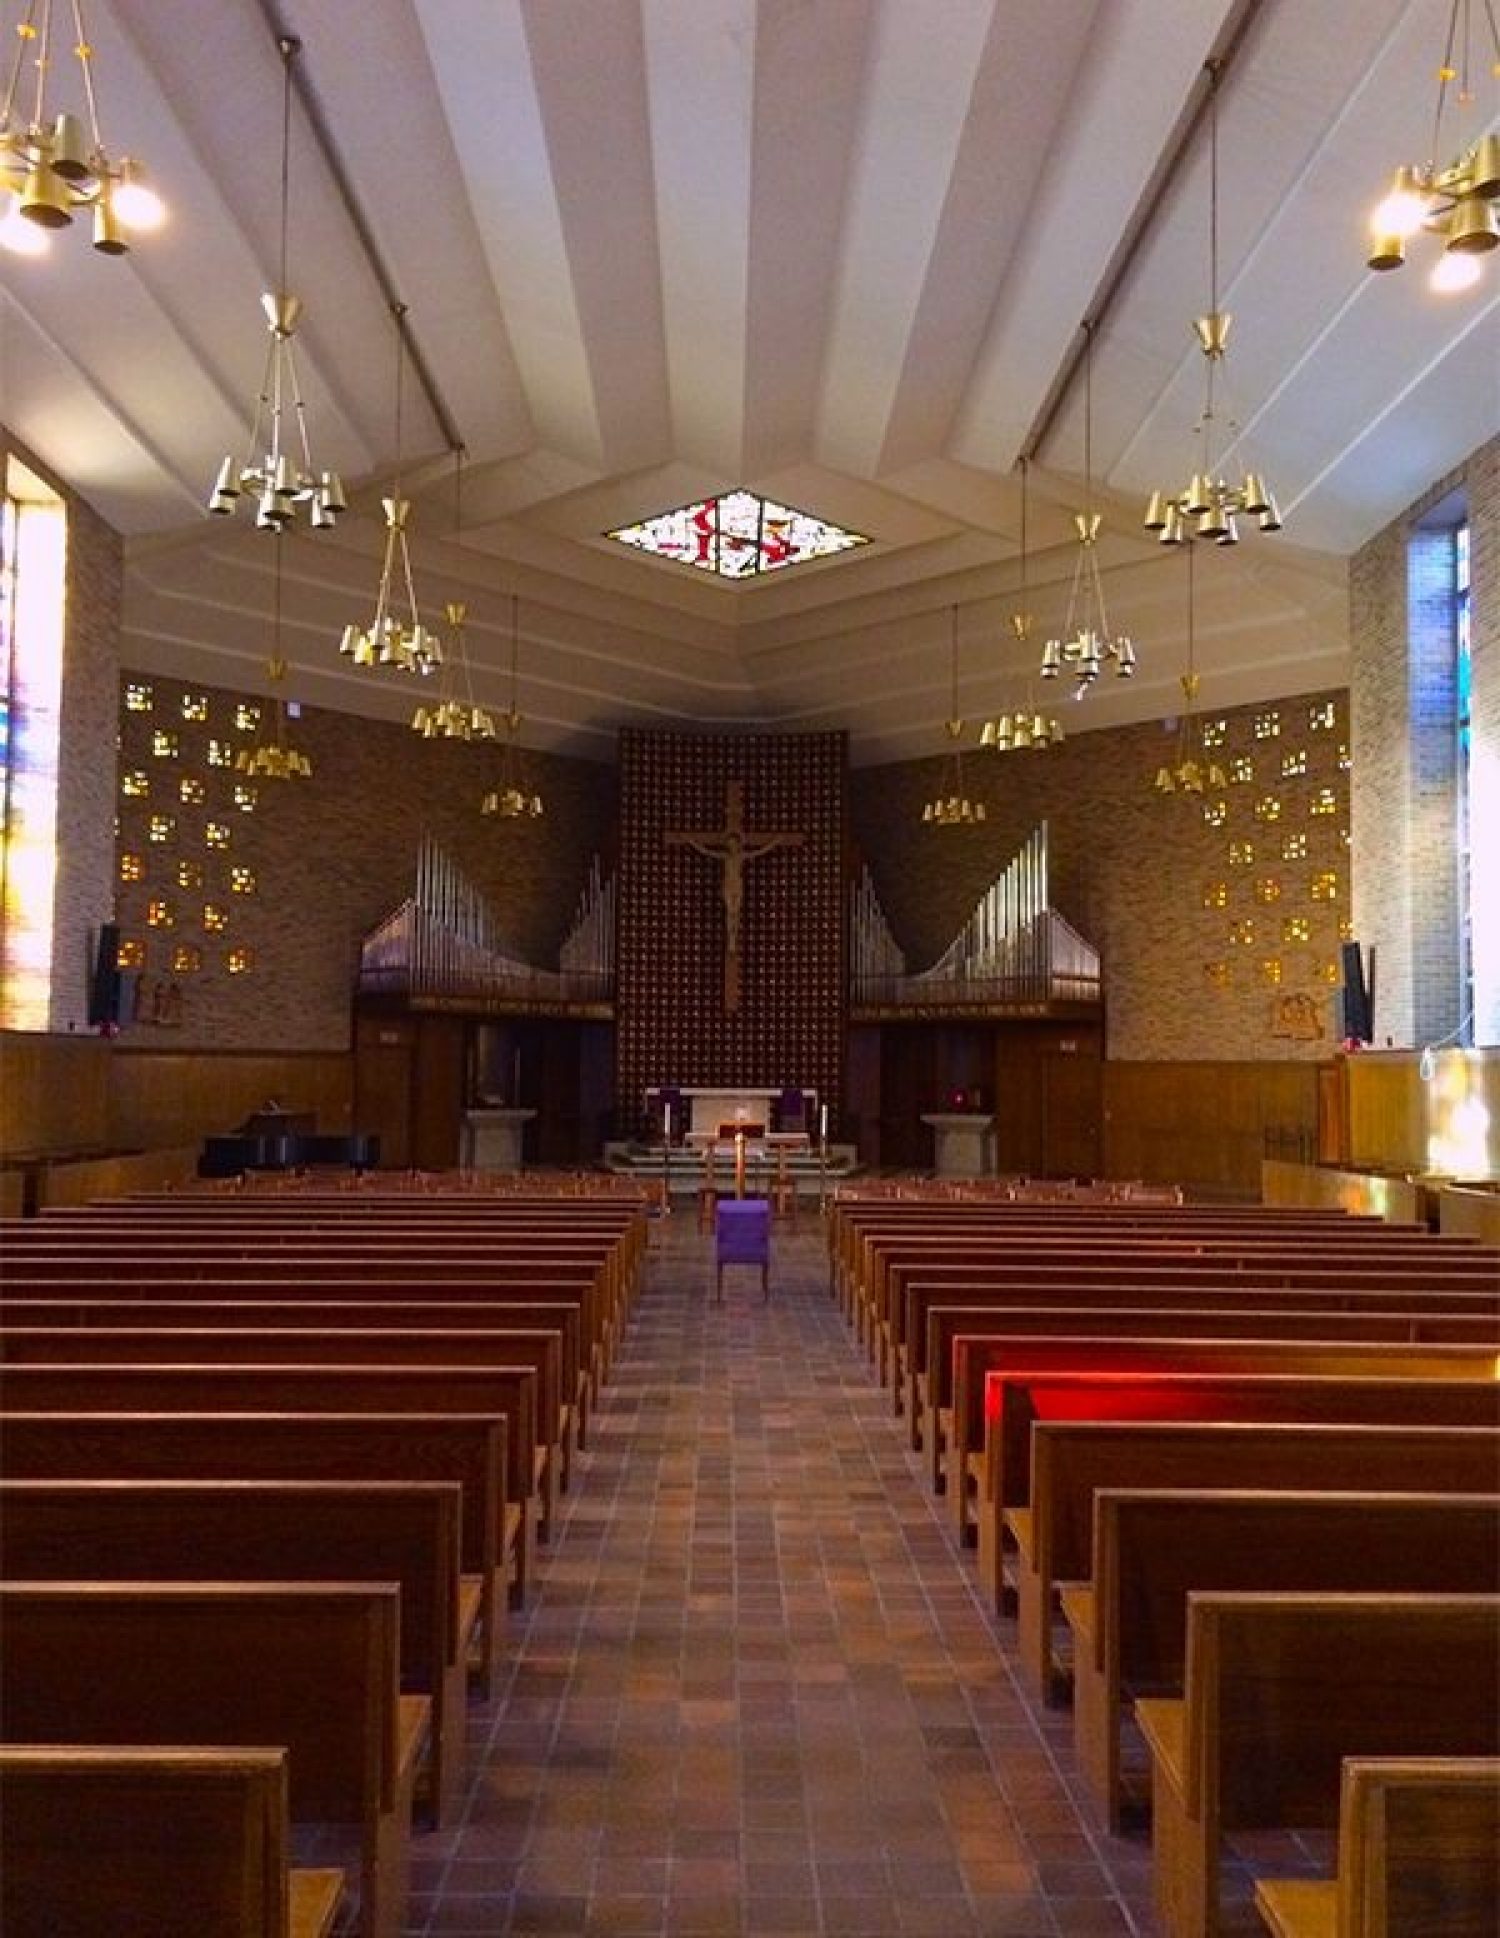 Inside view of a chapel